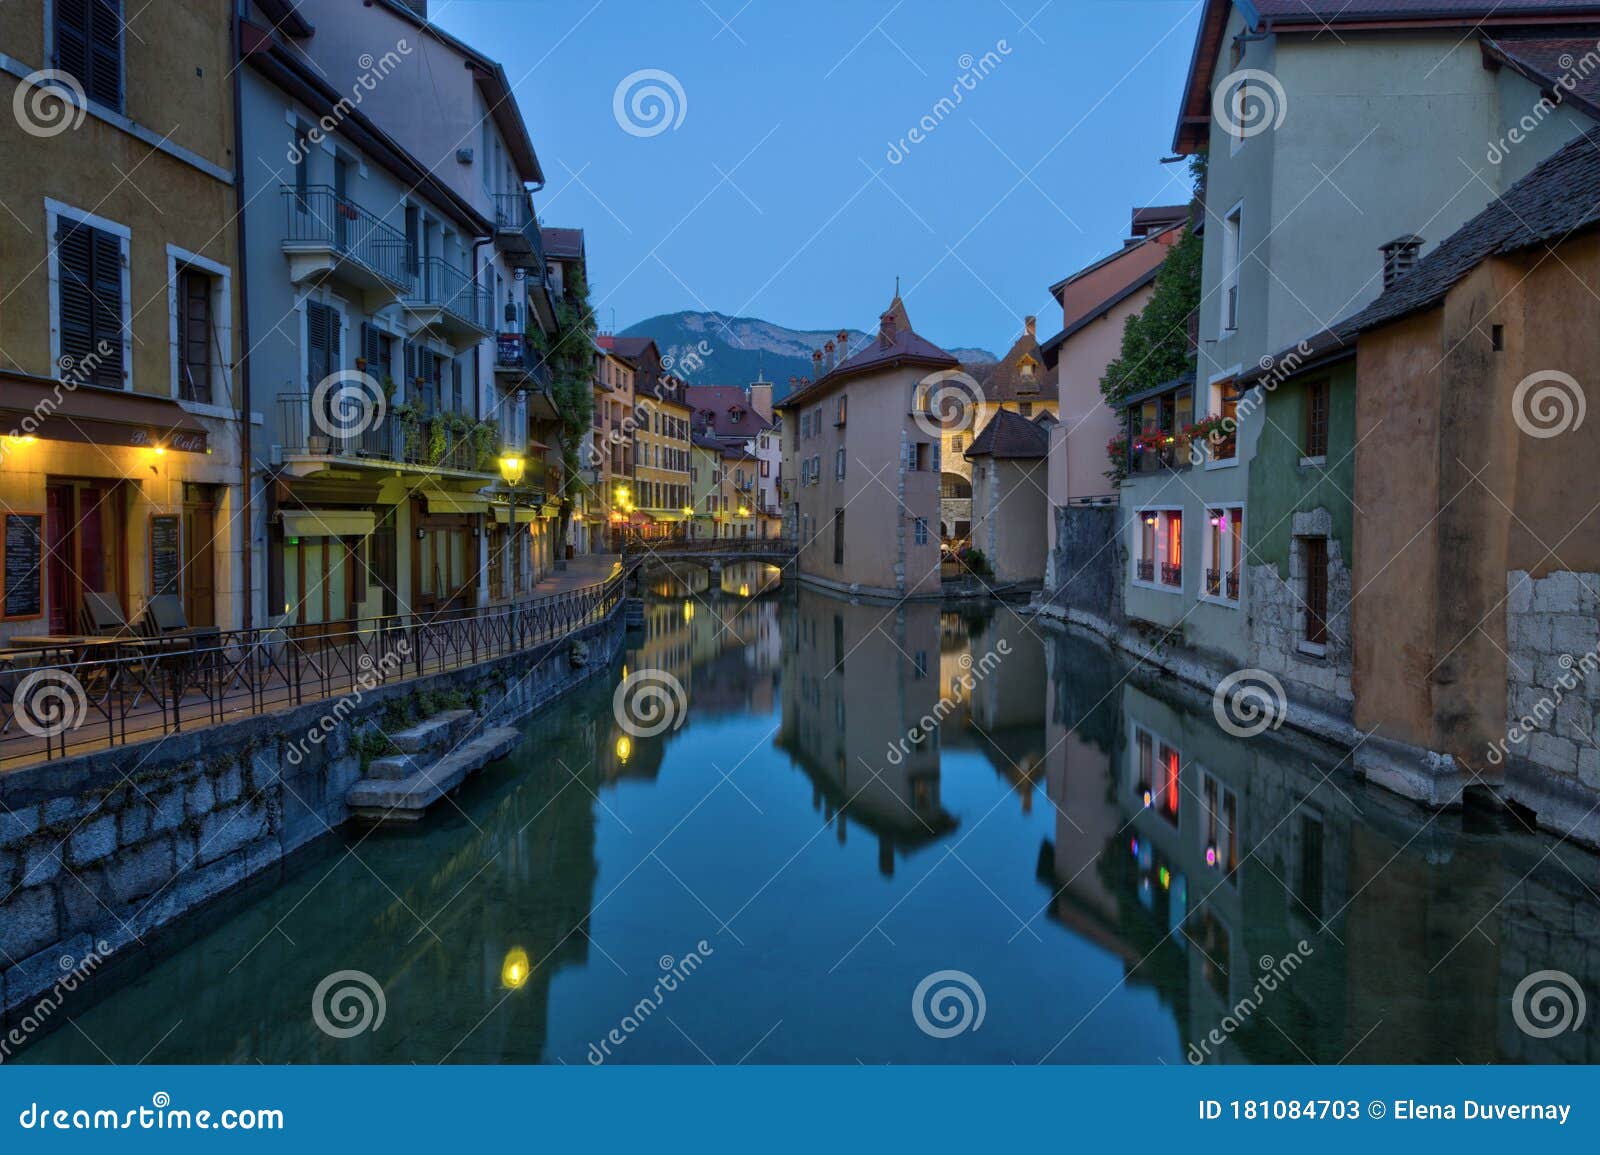 Quai De L`Ile and Canal in Annecy Old City, France, HDR Stock Image ...